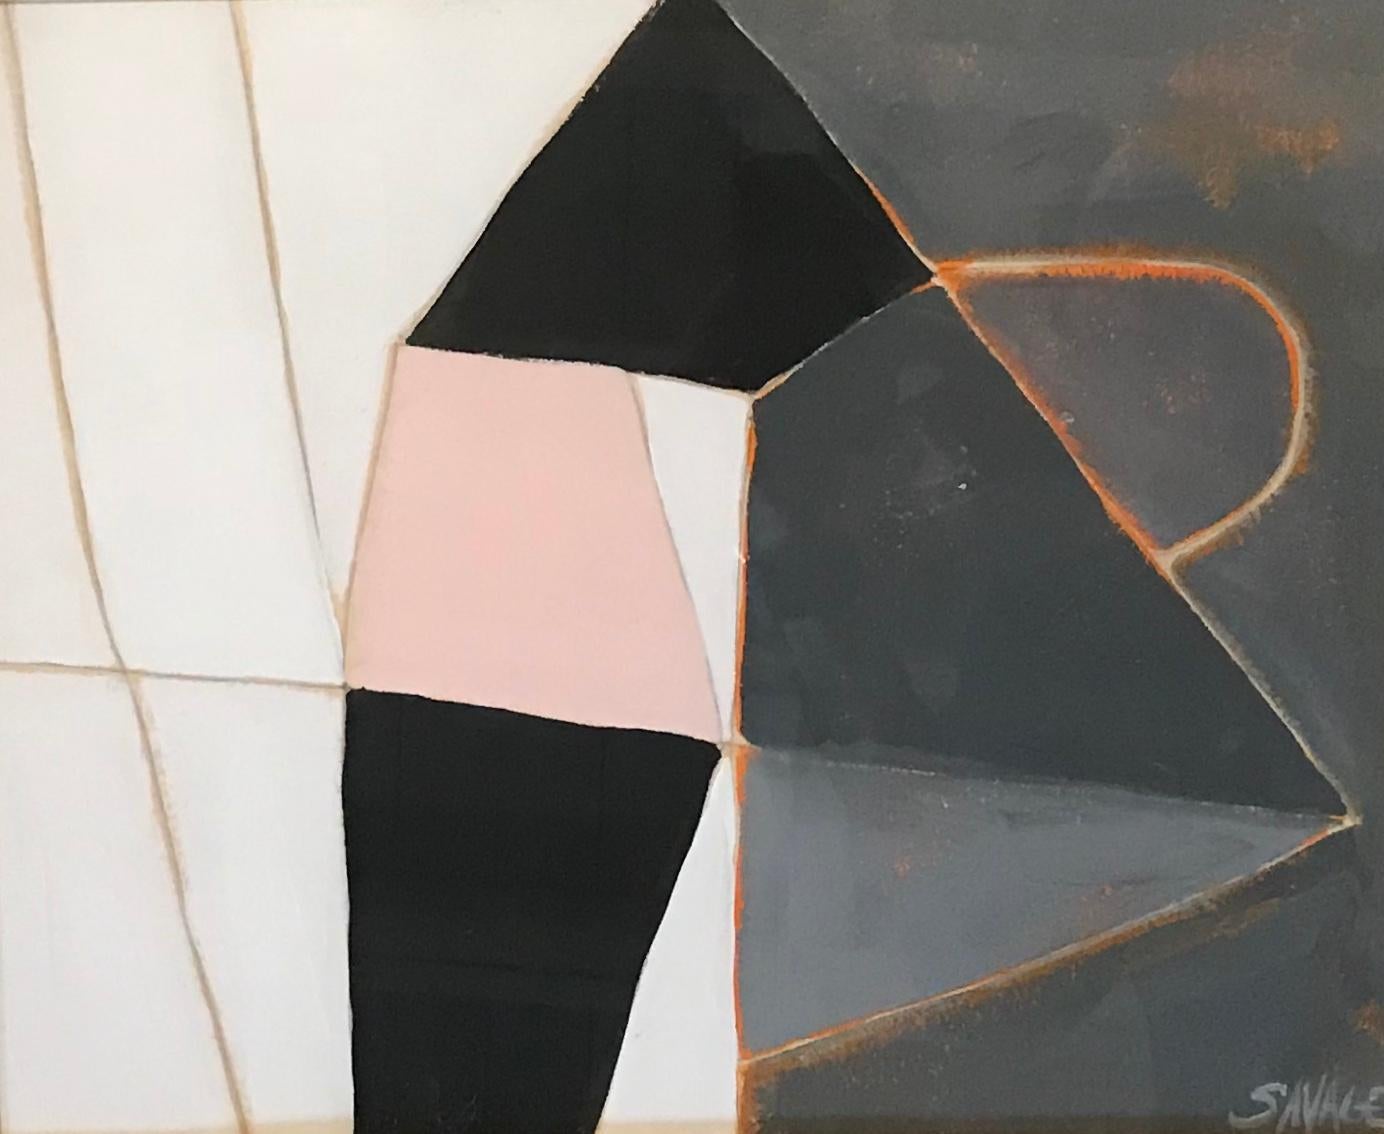 Abstract gouache painting by American artist Shawn Savage.
White, grey, pink and black.
Vintage gold gilt wood frame.
Makes a nice grouping with P1172, P1173.